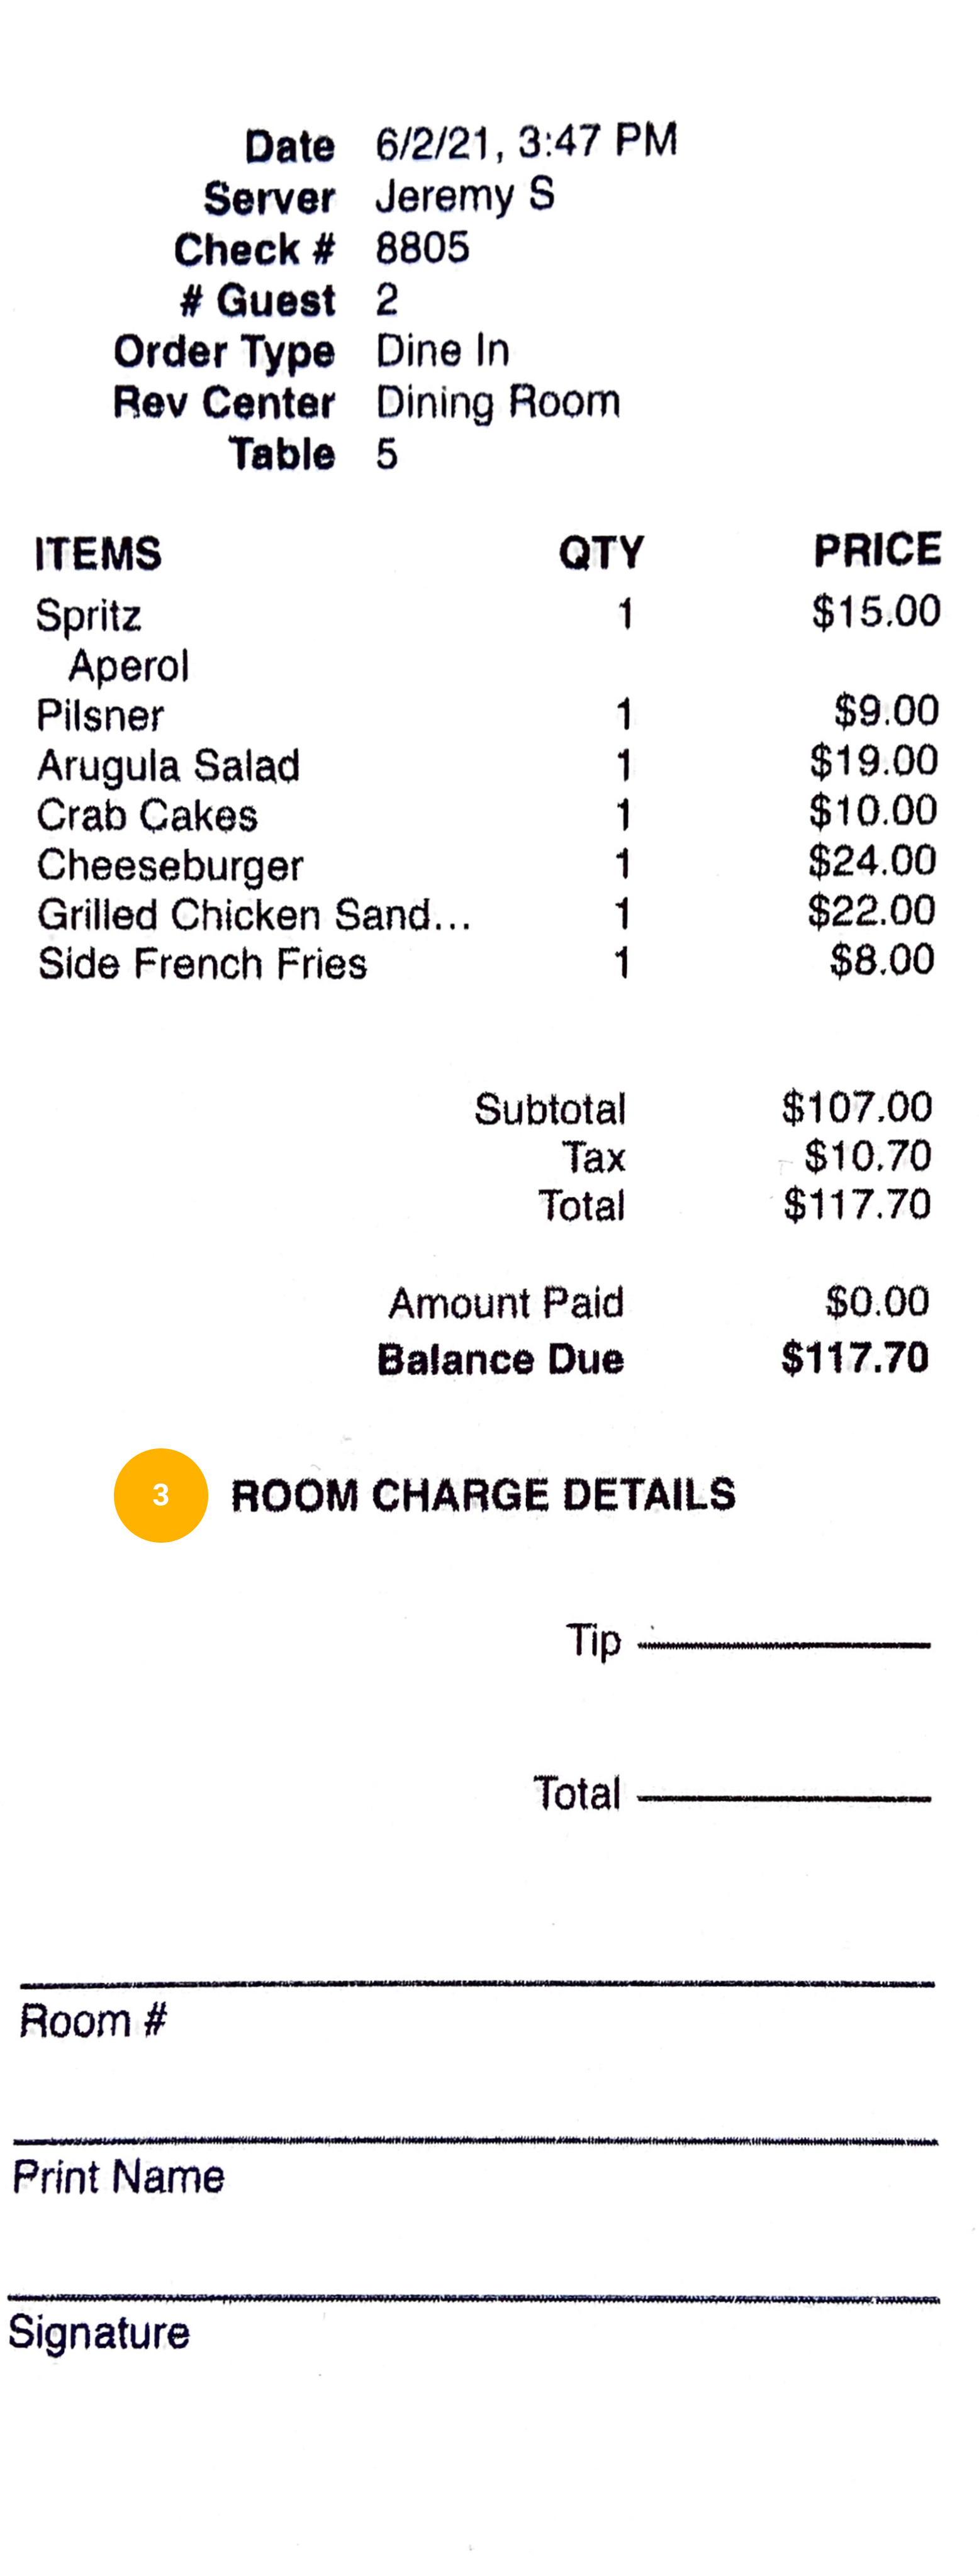 Room Charge Receipts And Posting SALIDO Resource Center